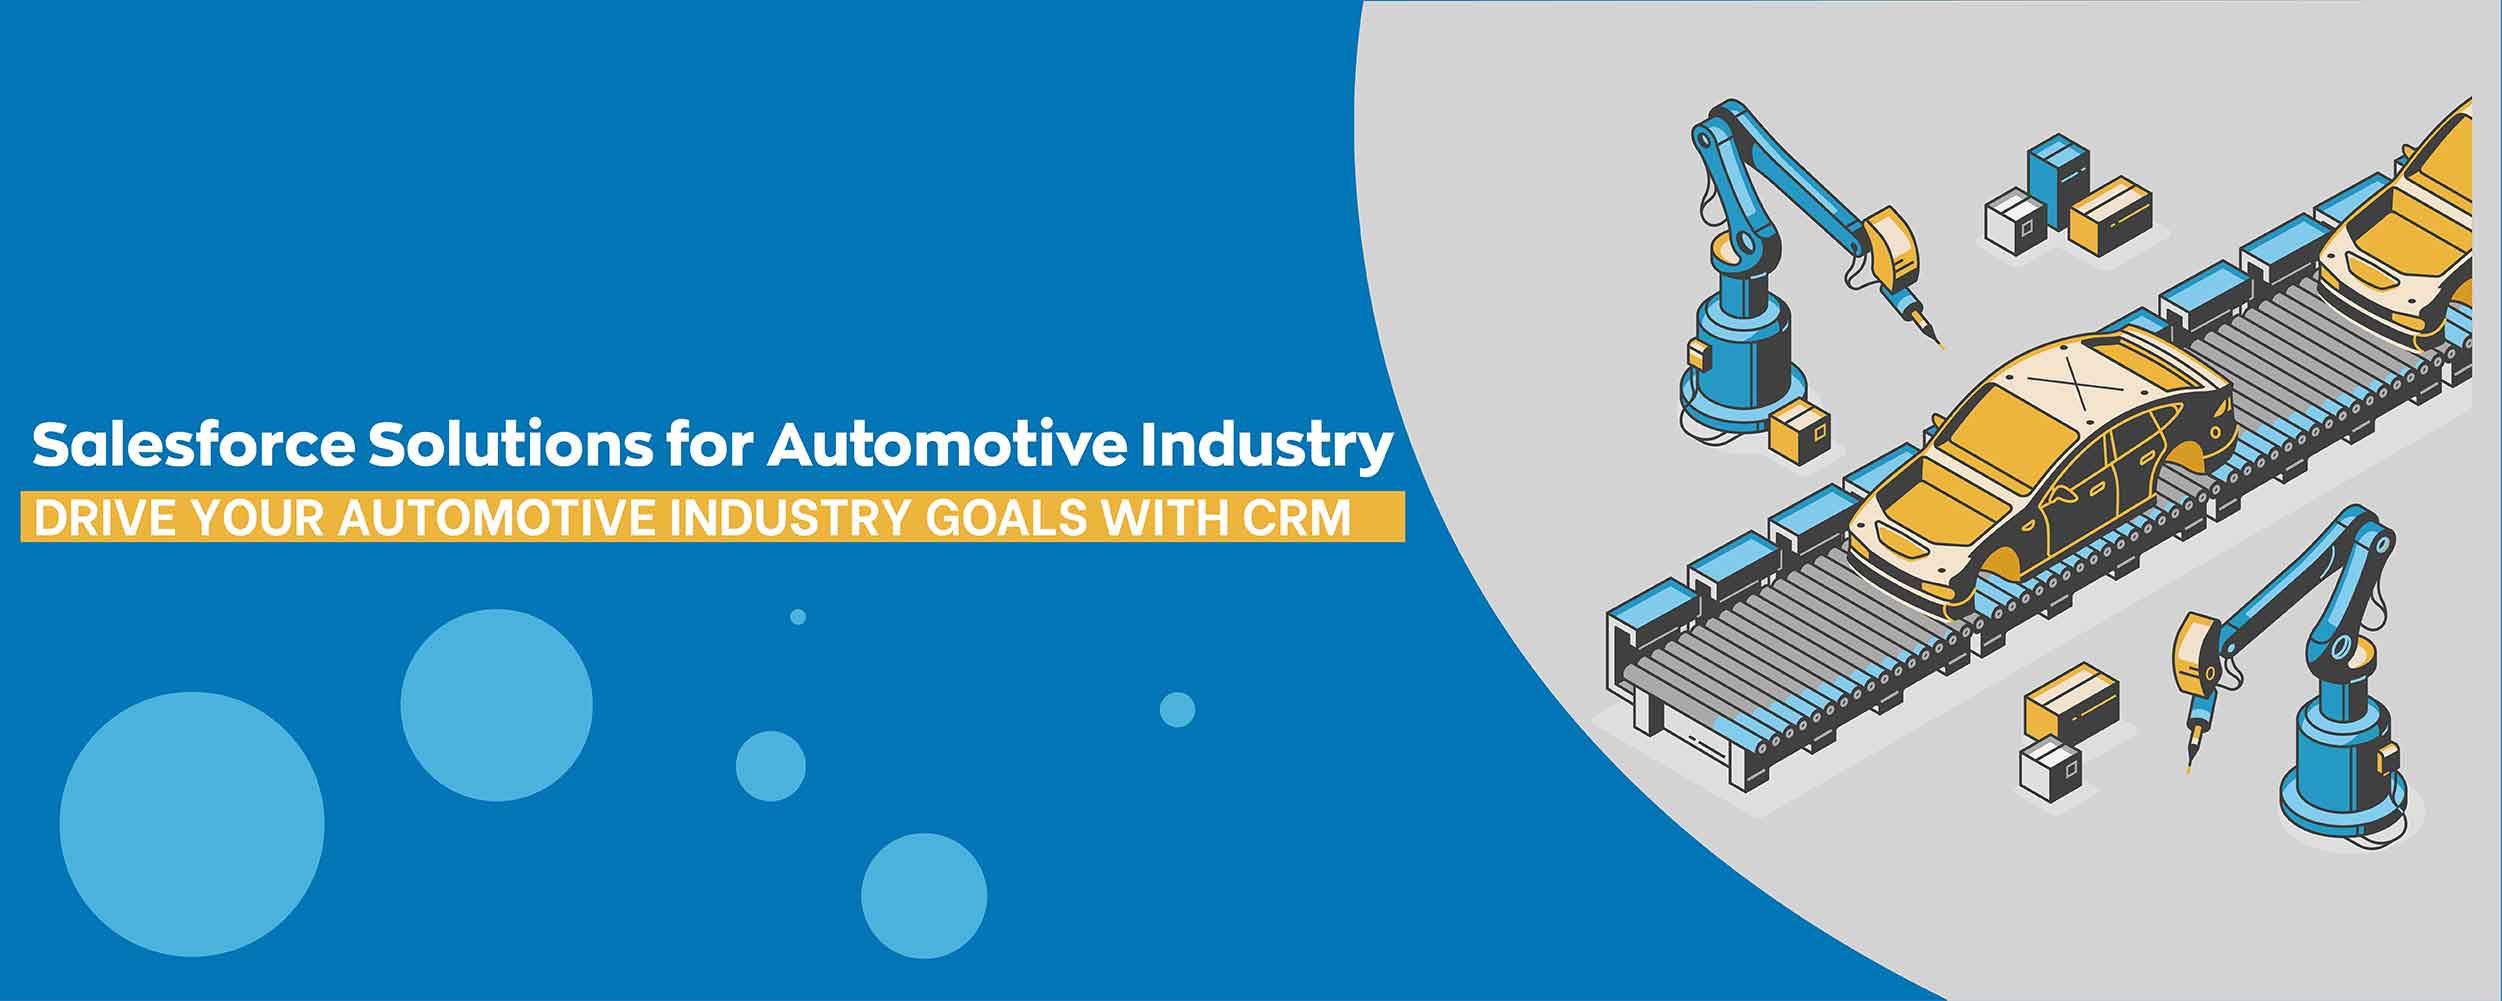 CRM Software for Automotive Industry